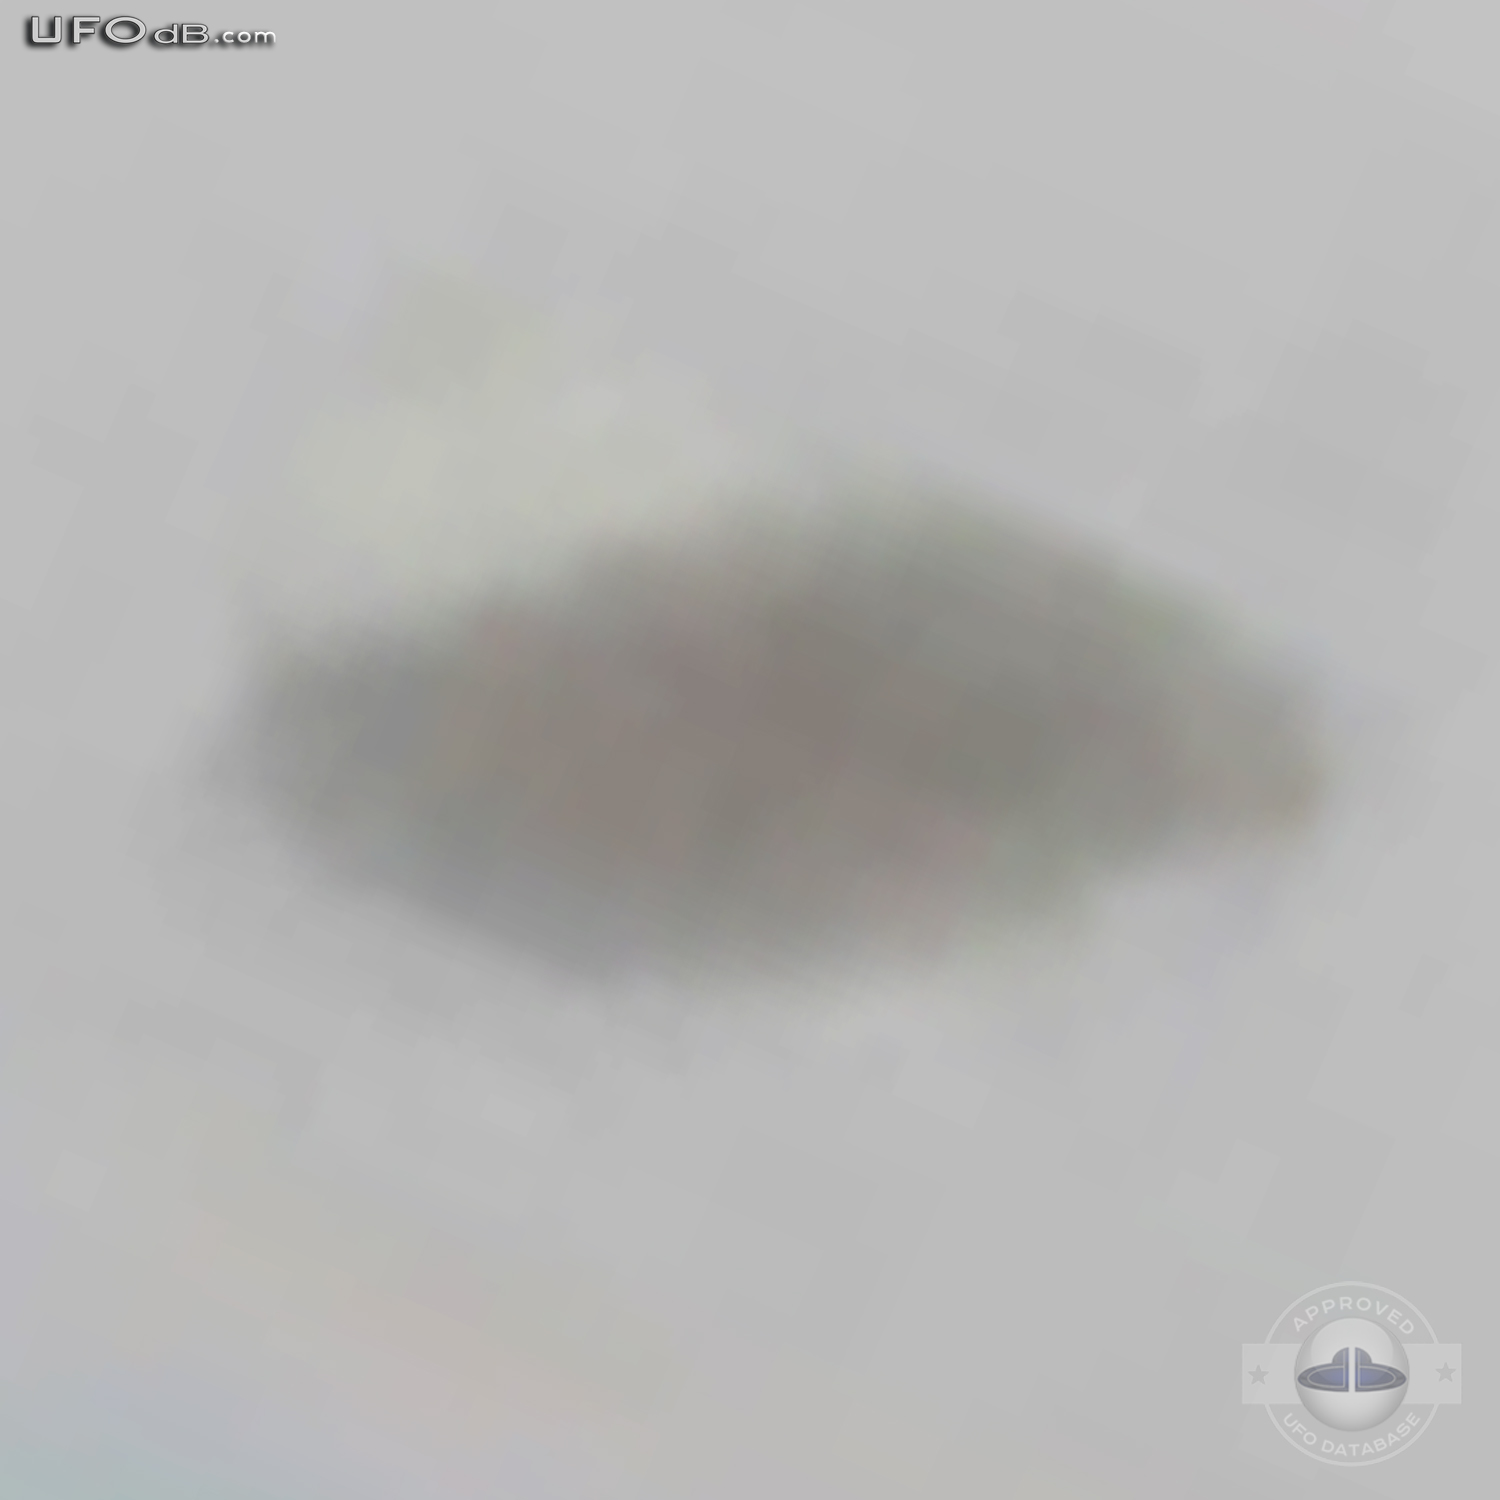 Humming whirring sounds heard with UFO picture | Hangzhou | April 2011 UFO Picture #332-8